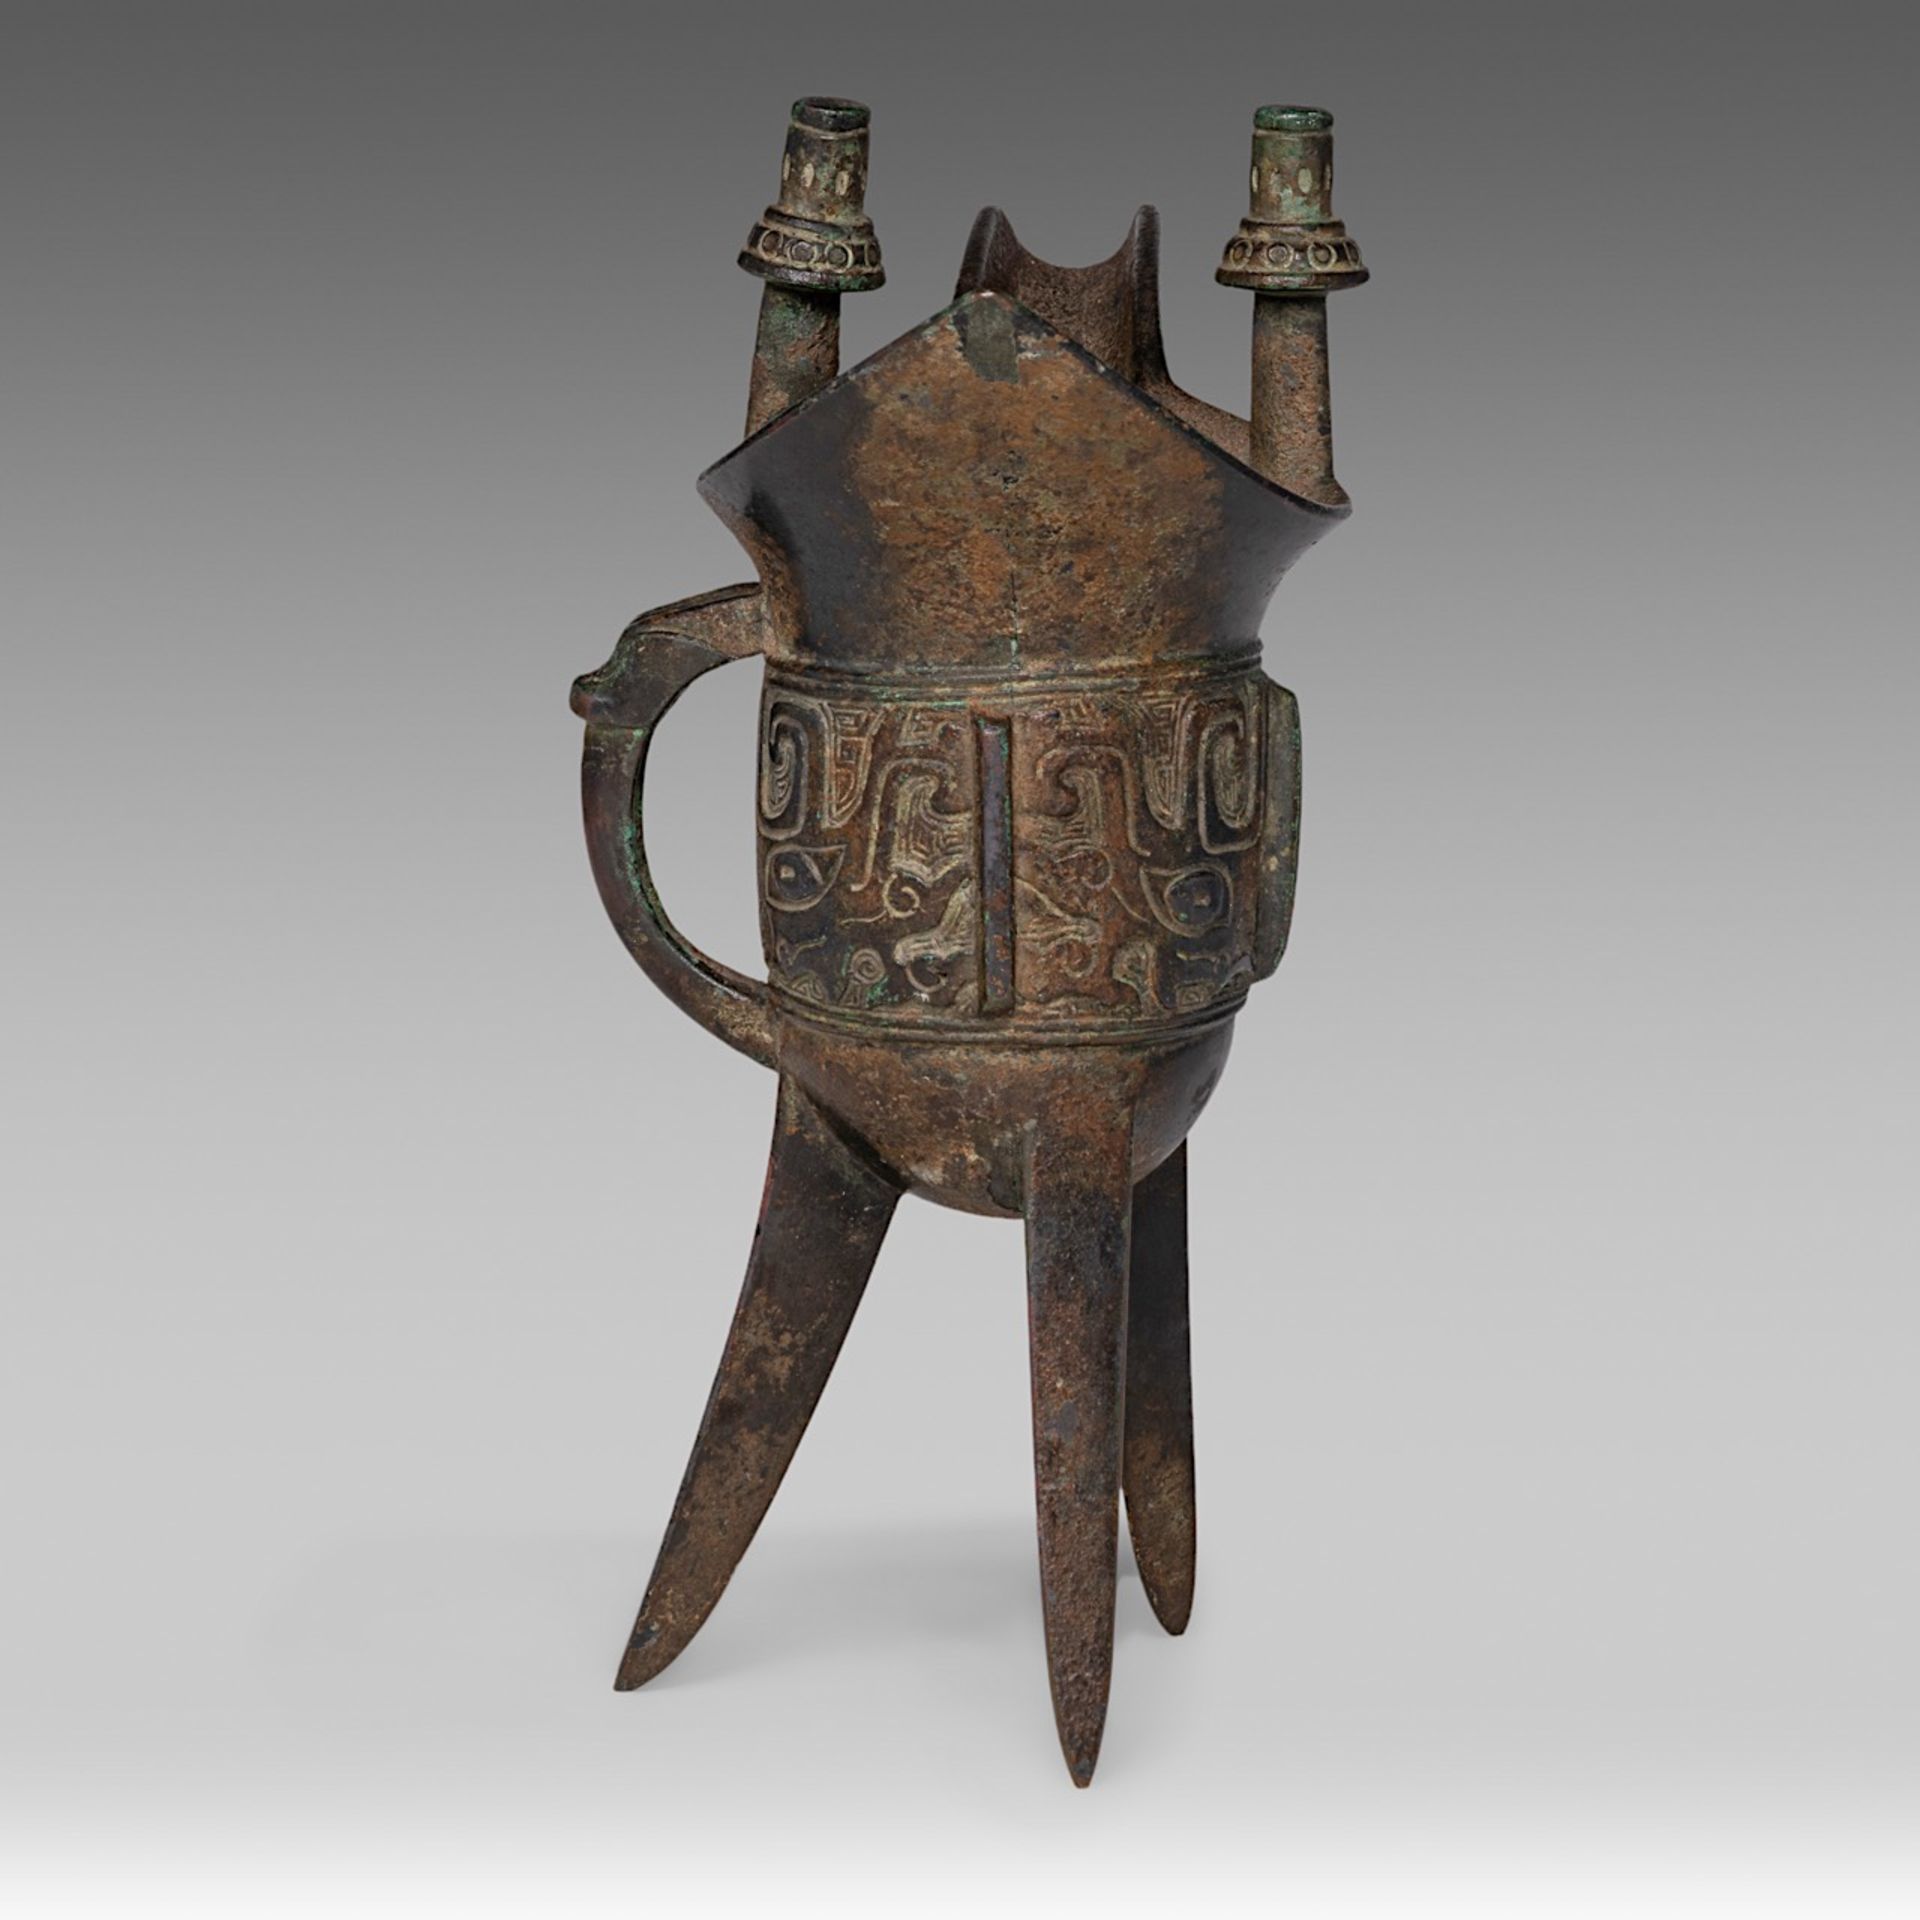 A Chinese archaistic ritual bronze 'Jue' vessel, Ming dynasty, H 19,2 - L 17,3 cm - Image 5 of 7